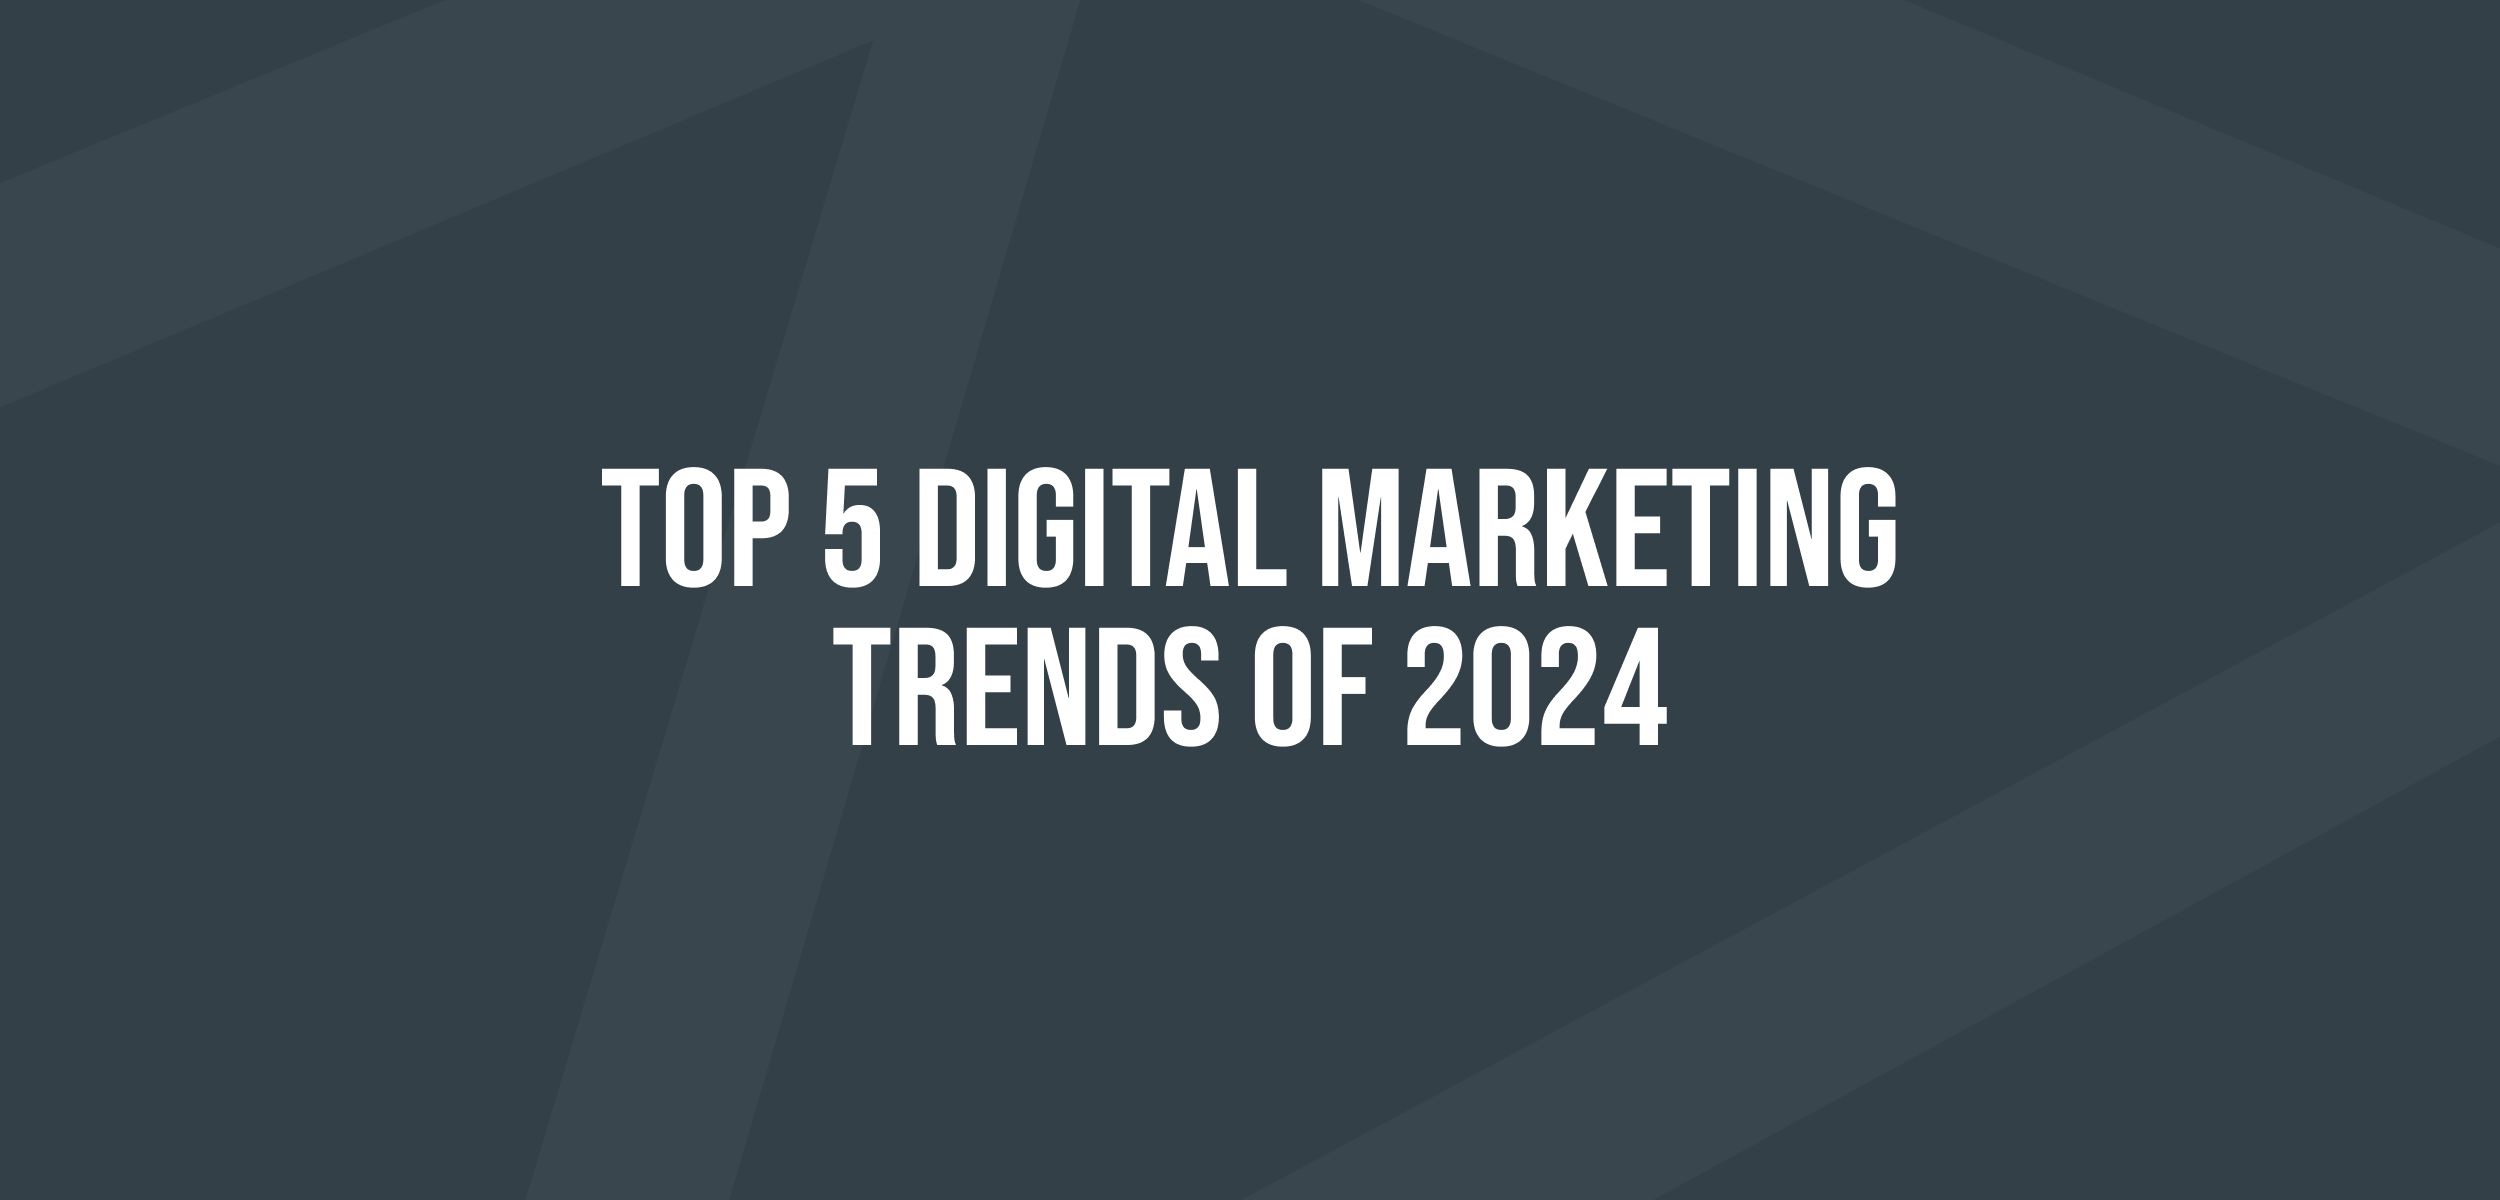 A Guide to the Top 5 Digital Marketing Trends of 2024 